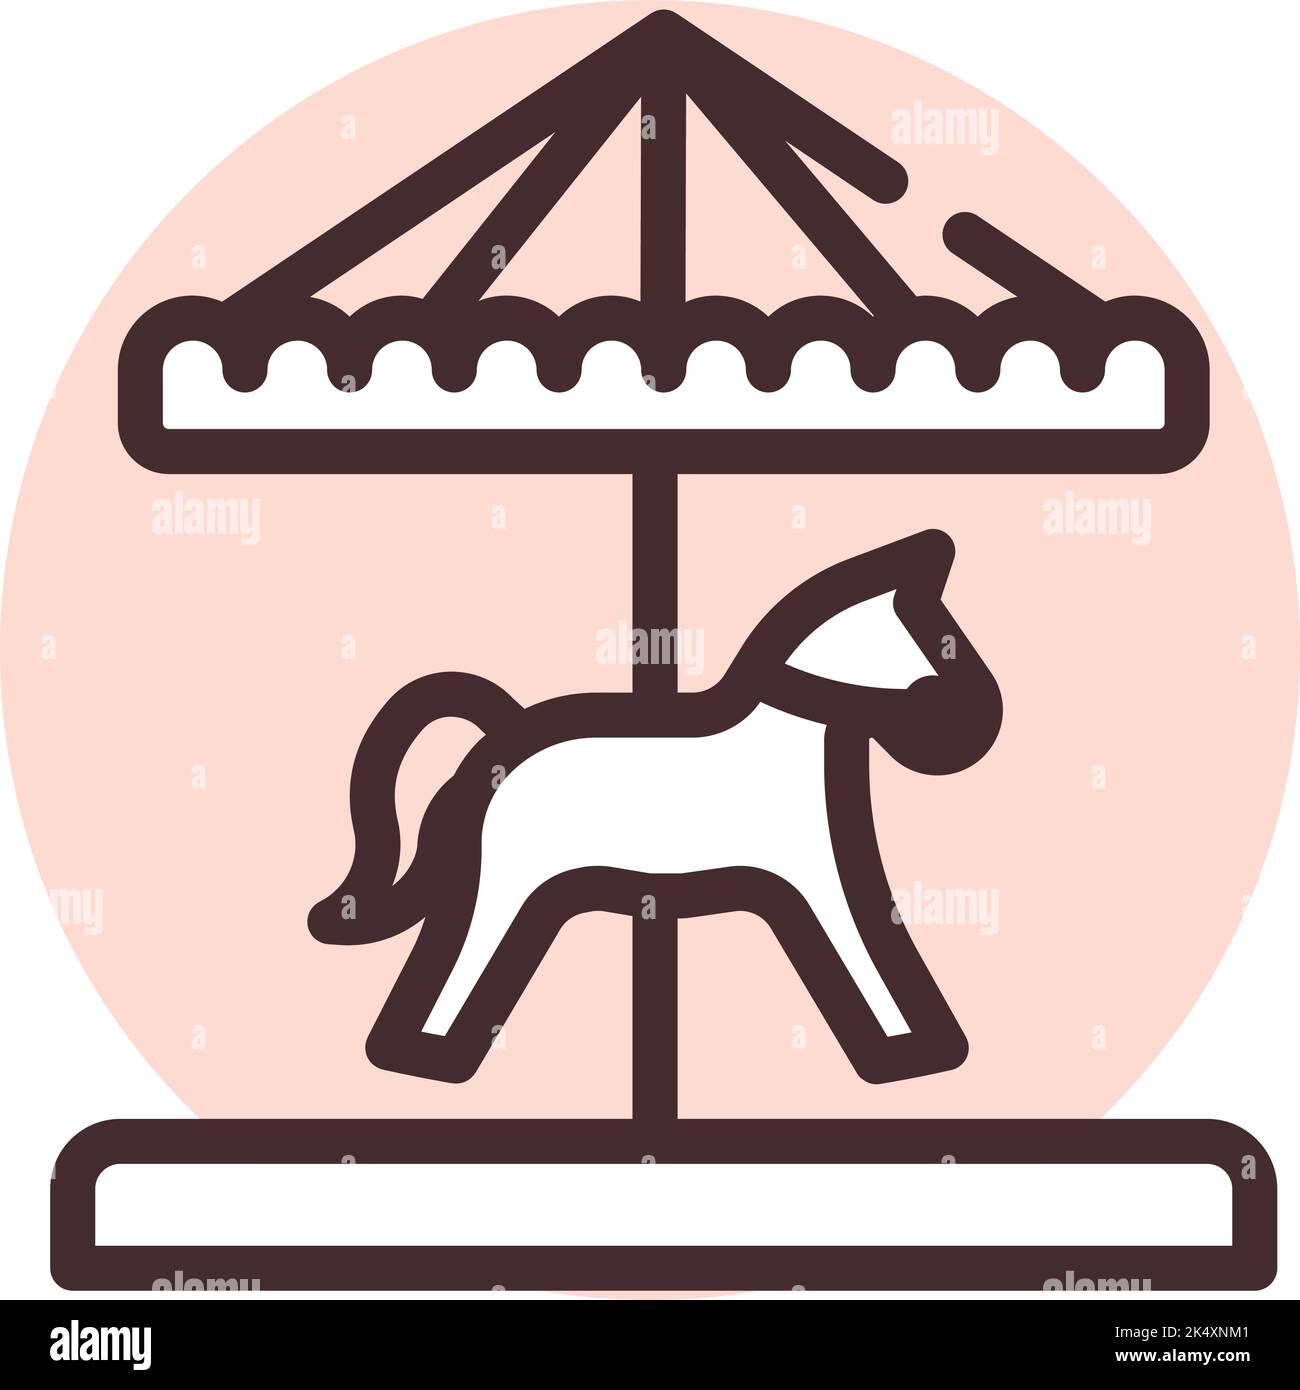 Circus kid carousel, illustration, vector on a white background. Stock Vector